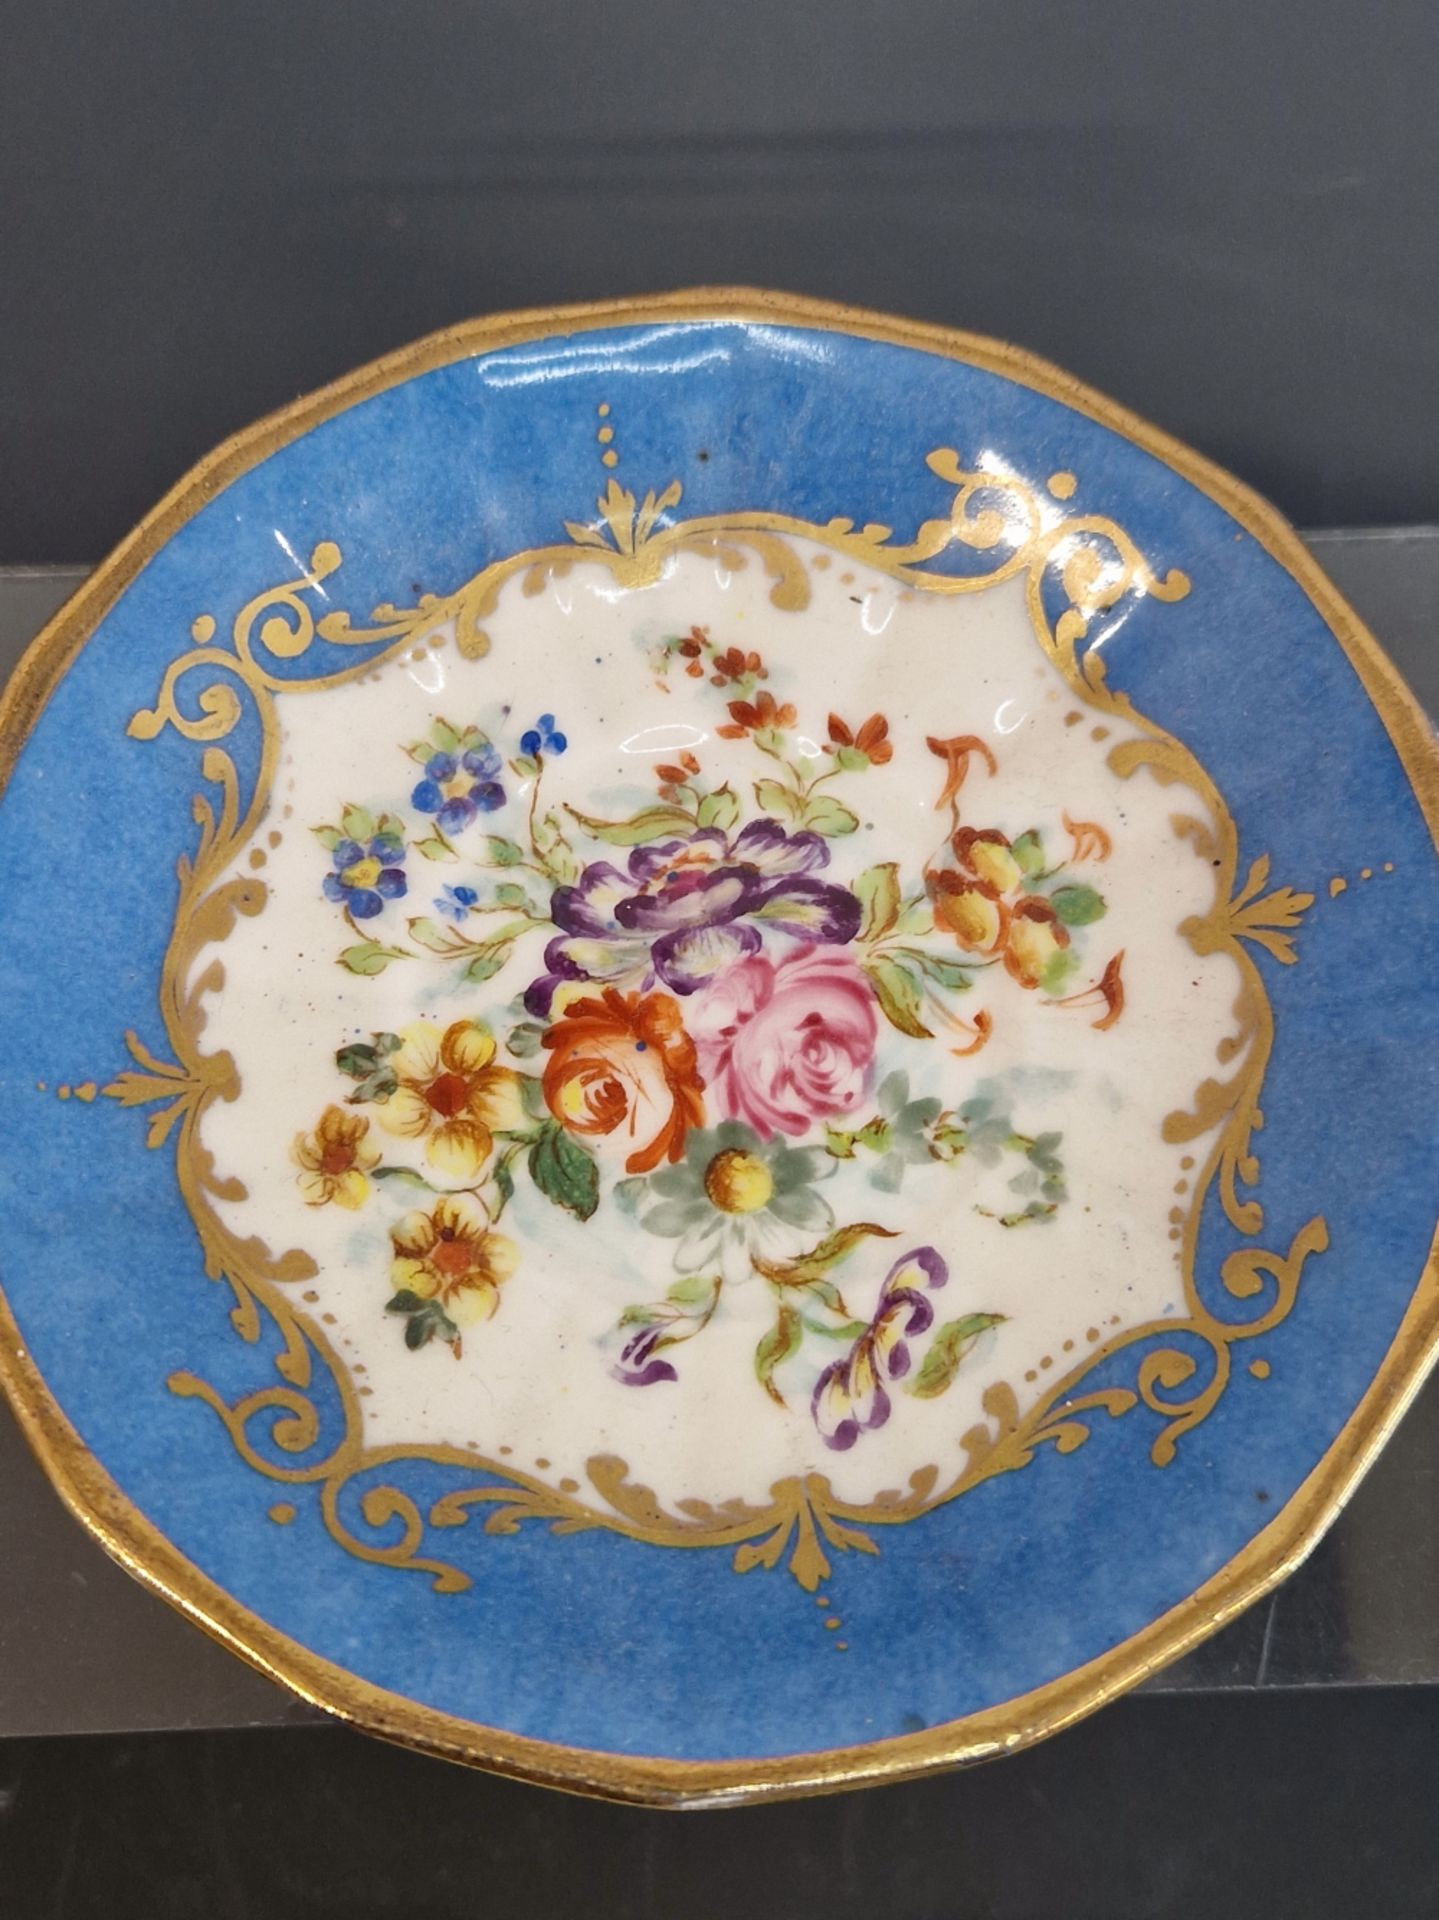 A PARIS PORCELAIN SEVRES STYLE BLUE GROUND FLOWER PAINTED TEA POT, COVER, CUP AND SAUCER - Image 11 of 12